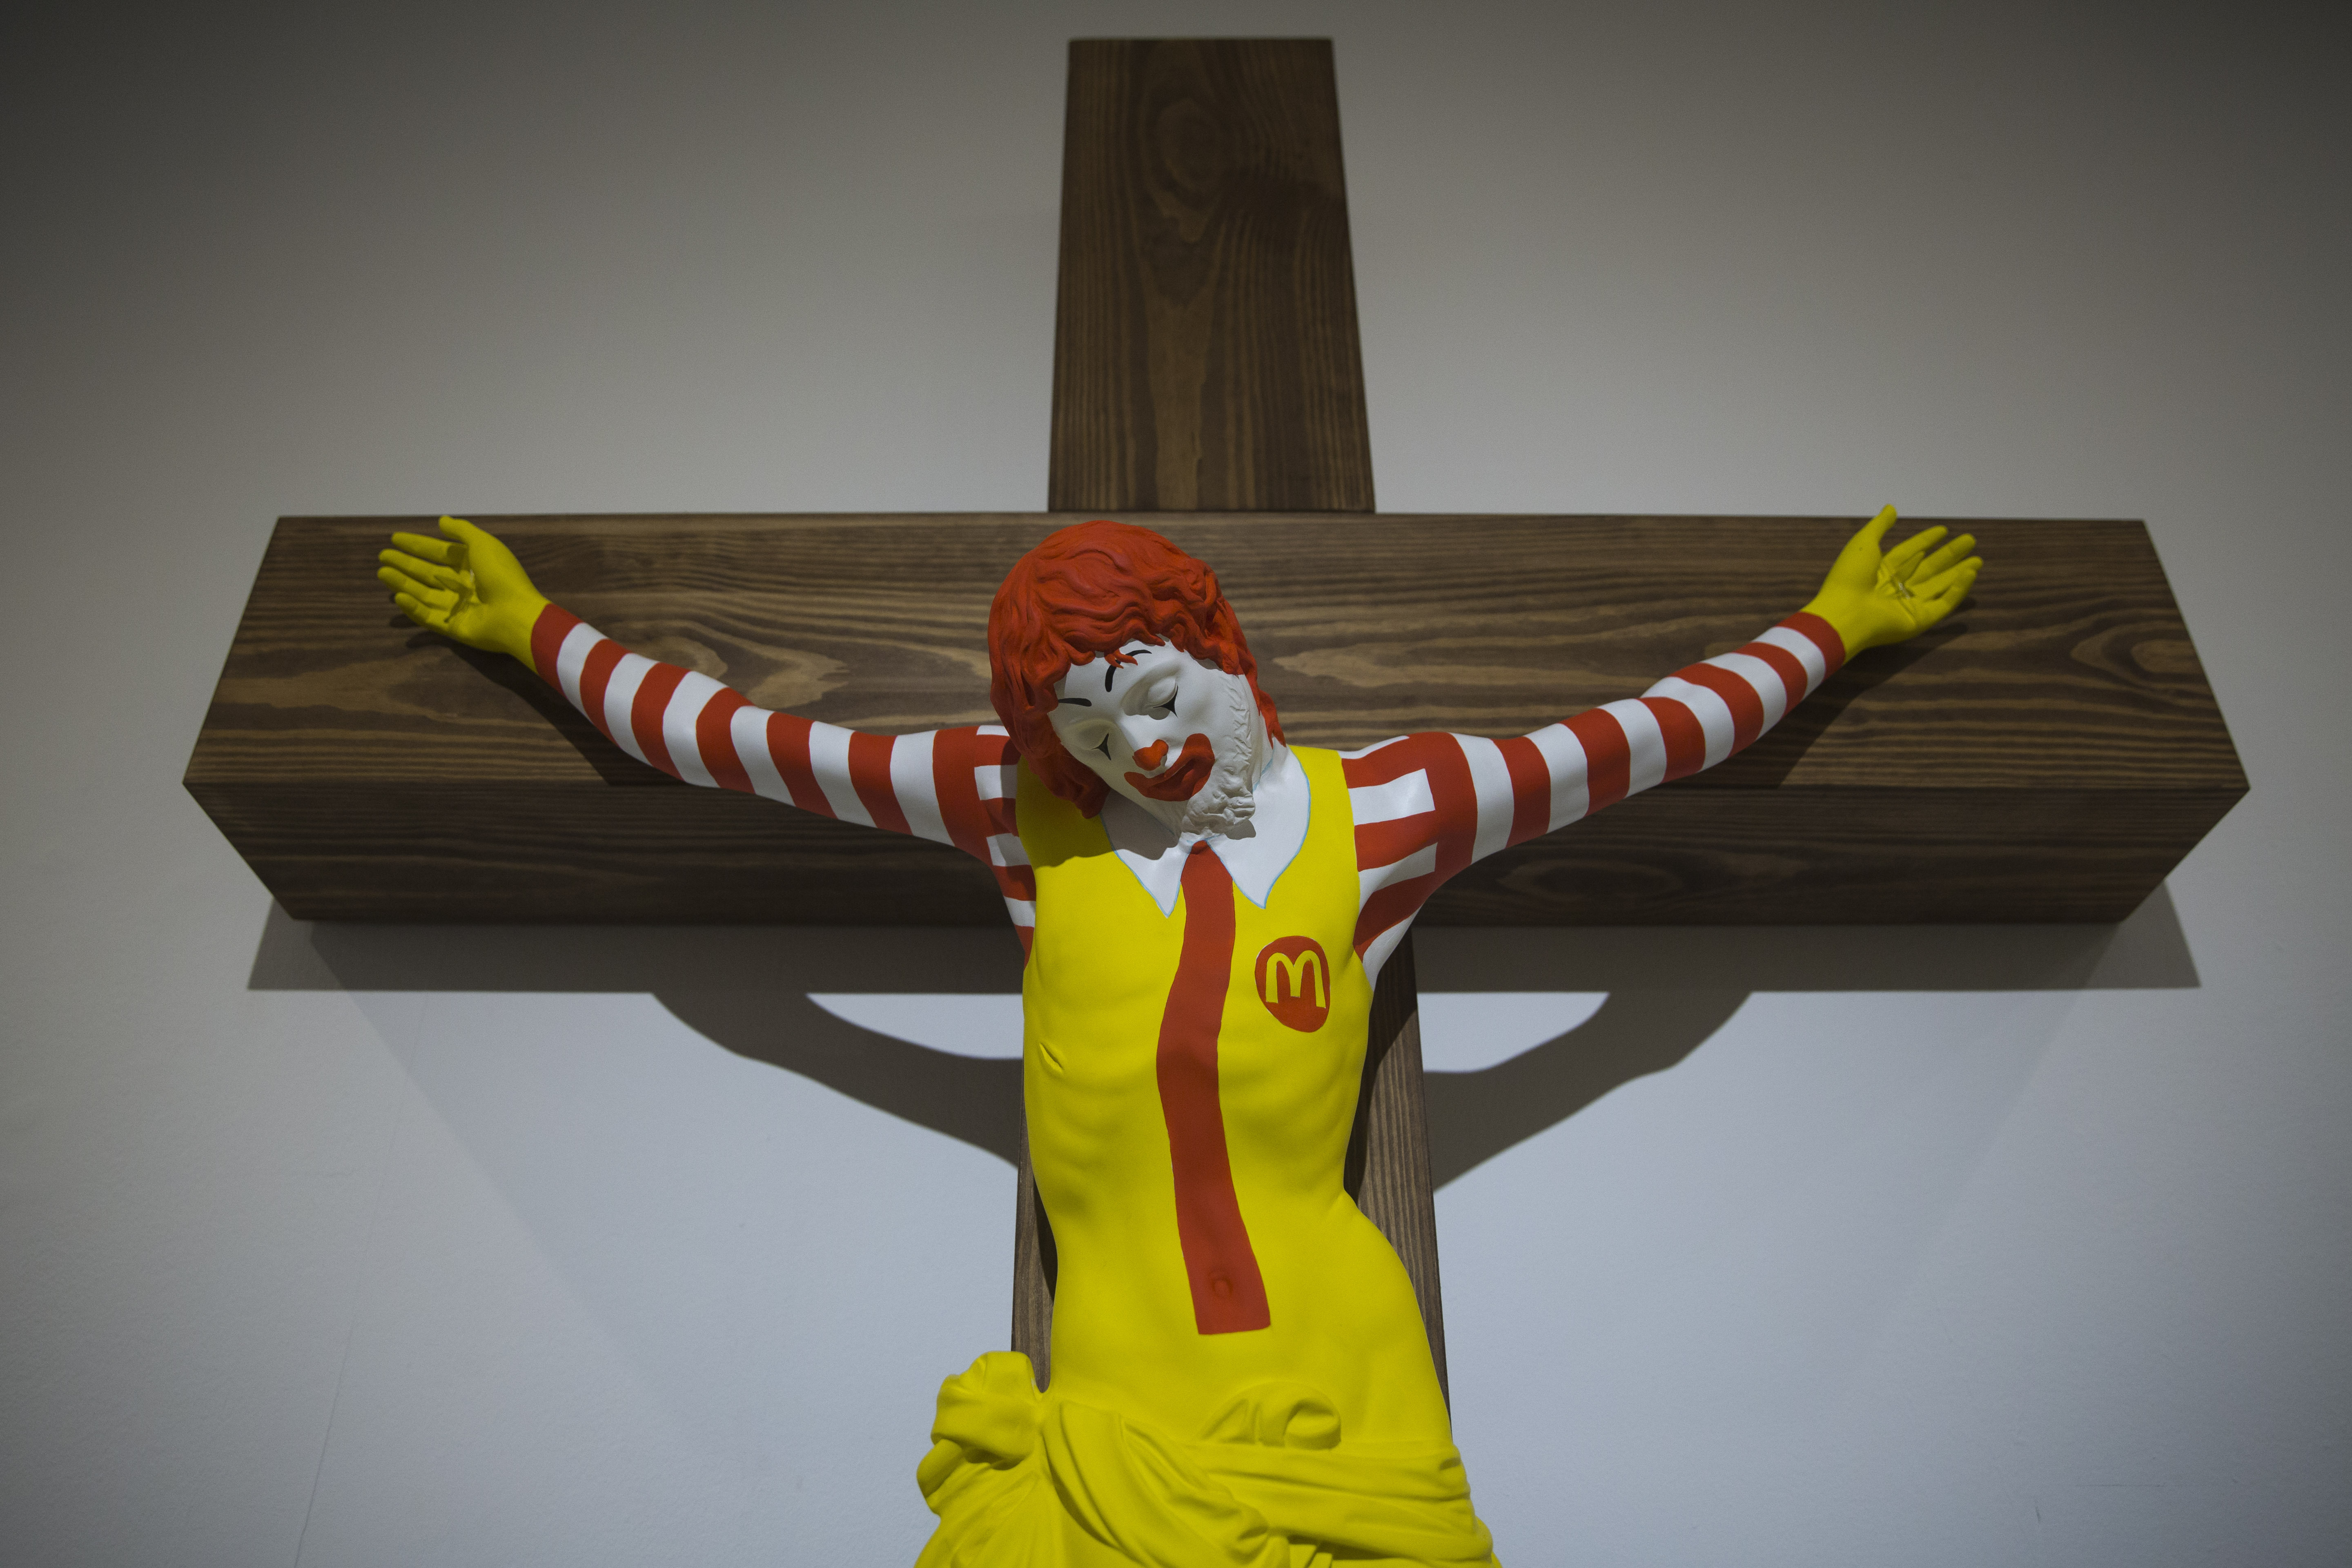 'McJesus' Sculpture Sparks Outrage Among Christians